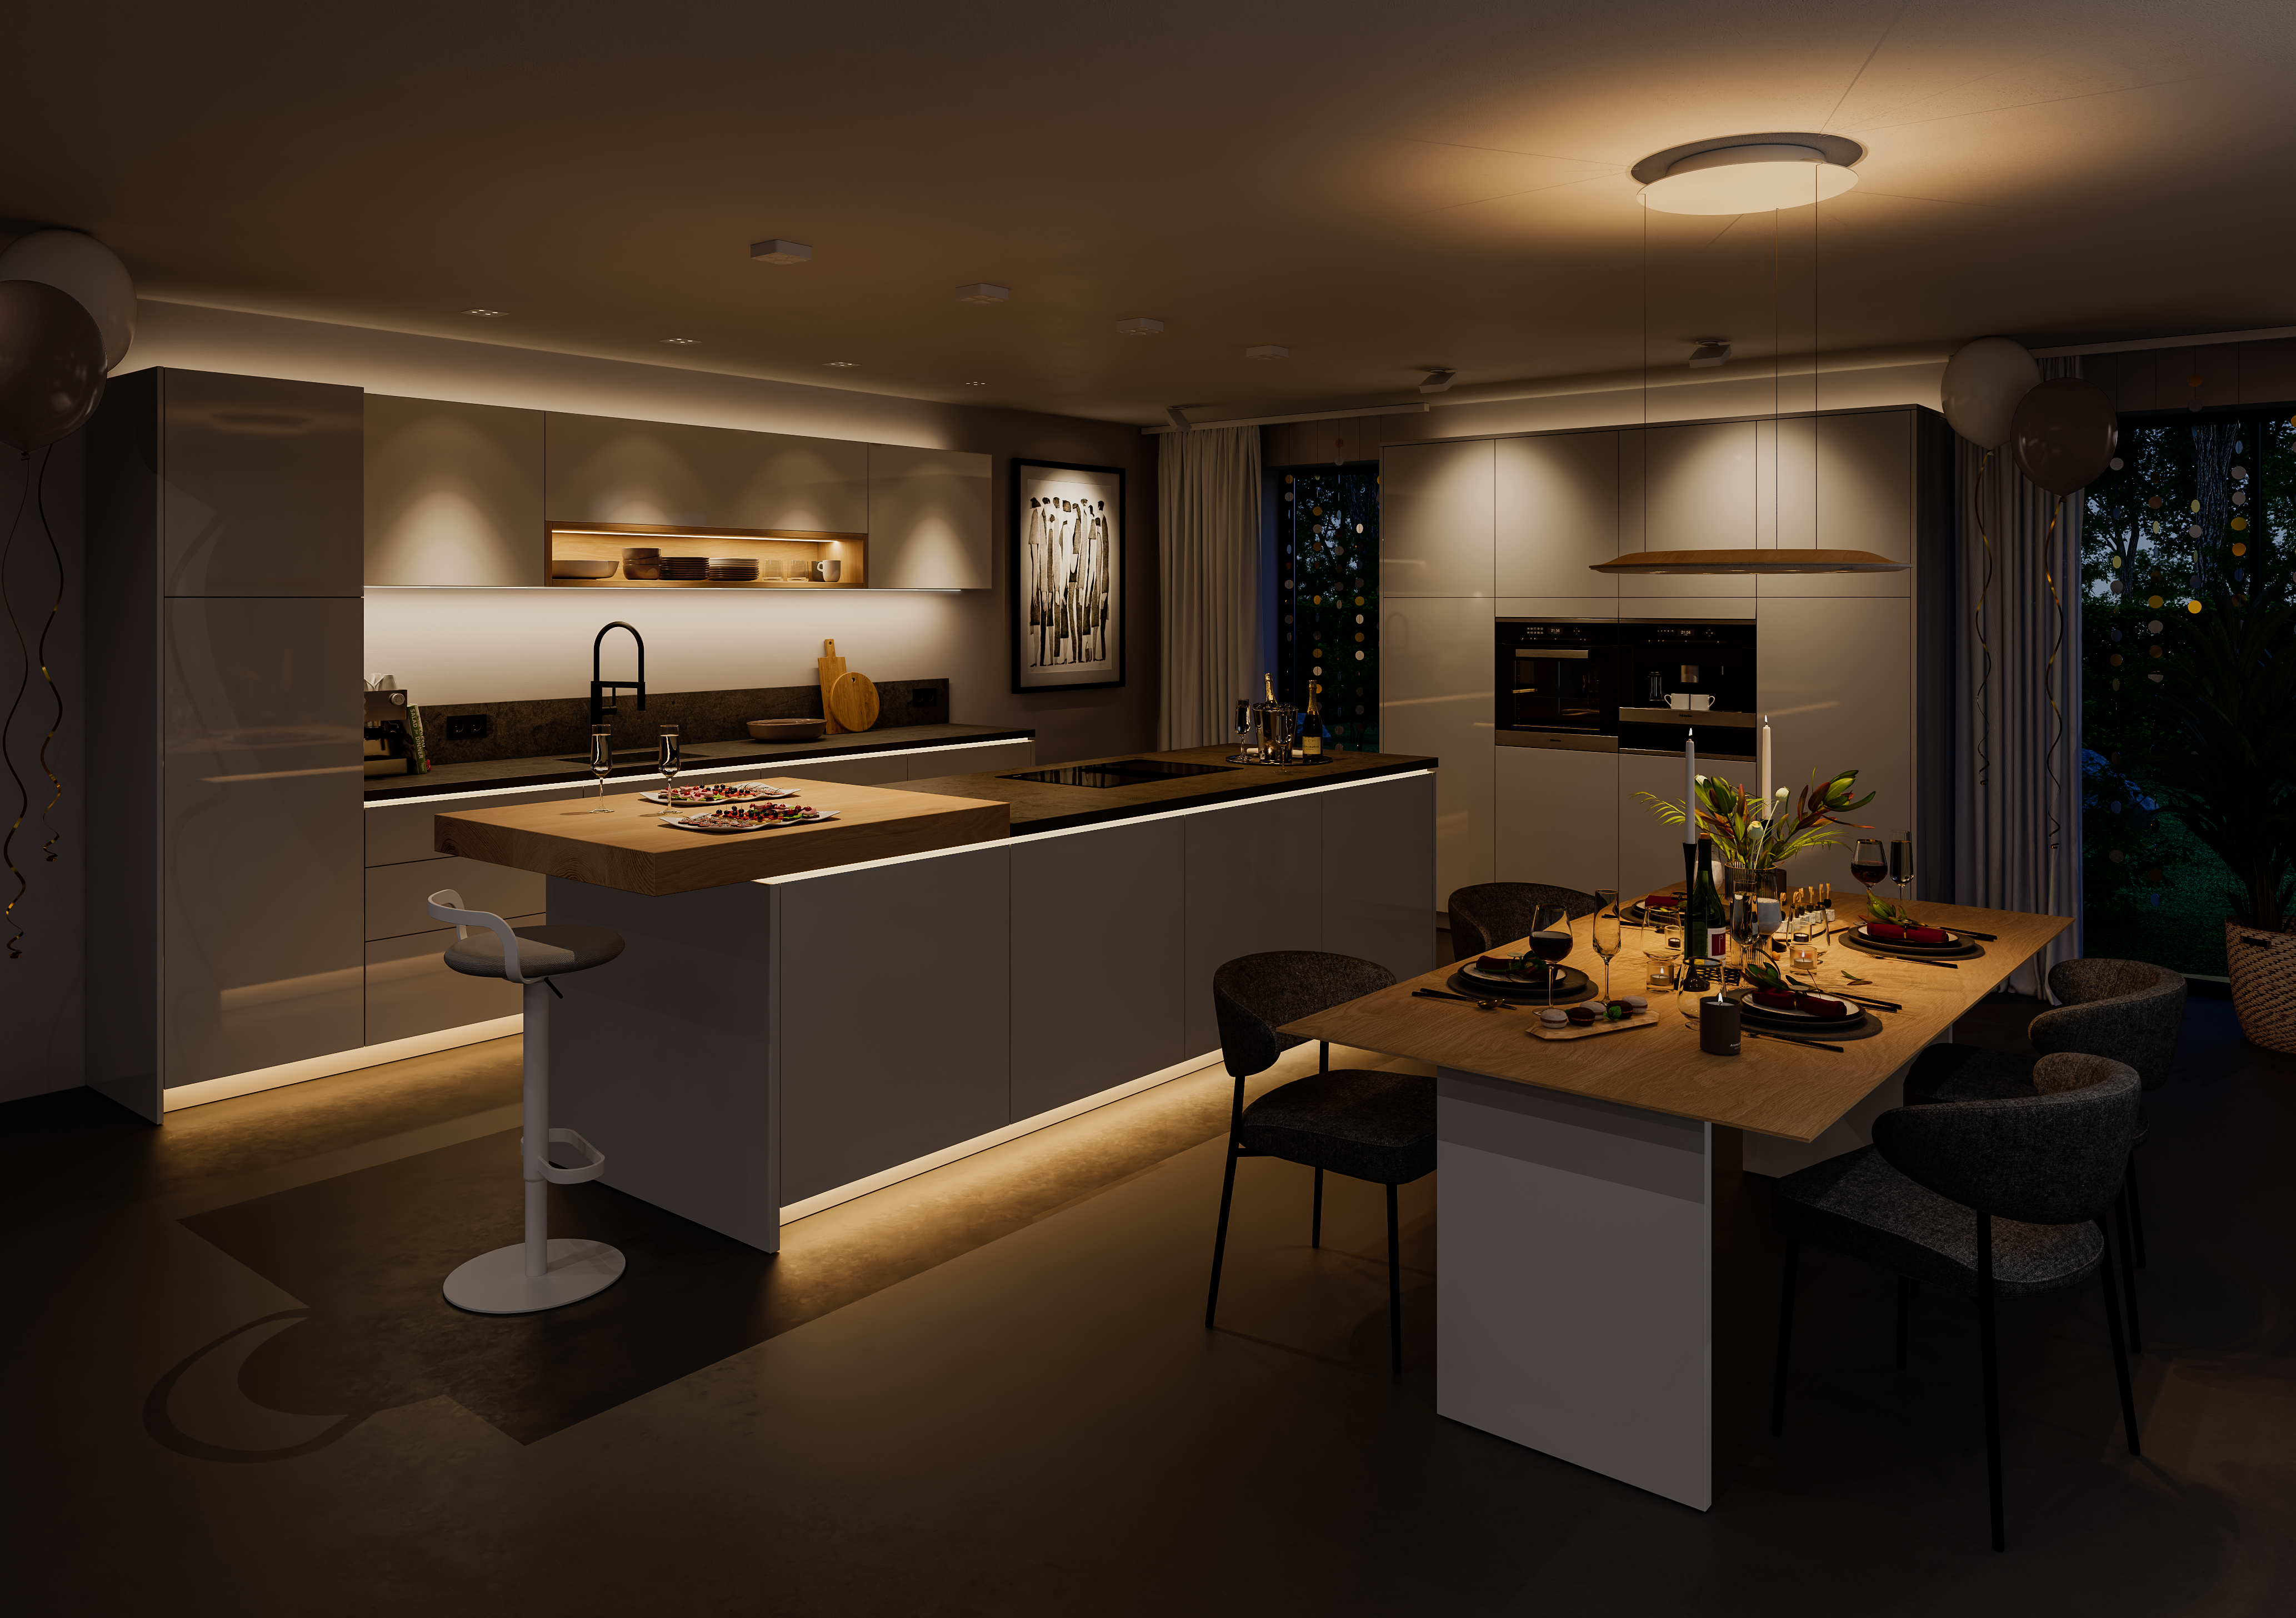 With the help of Häfele Connect technology, furniture and room lighting can be combined in one system and lighting scenes adapted to the user can be realized